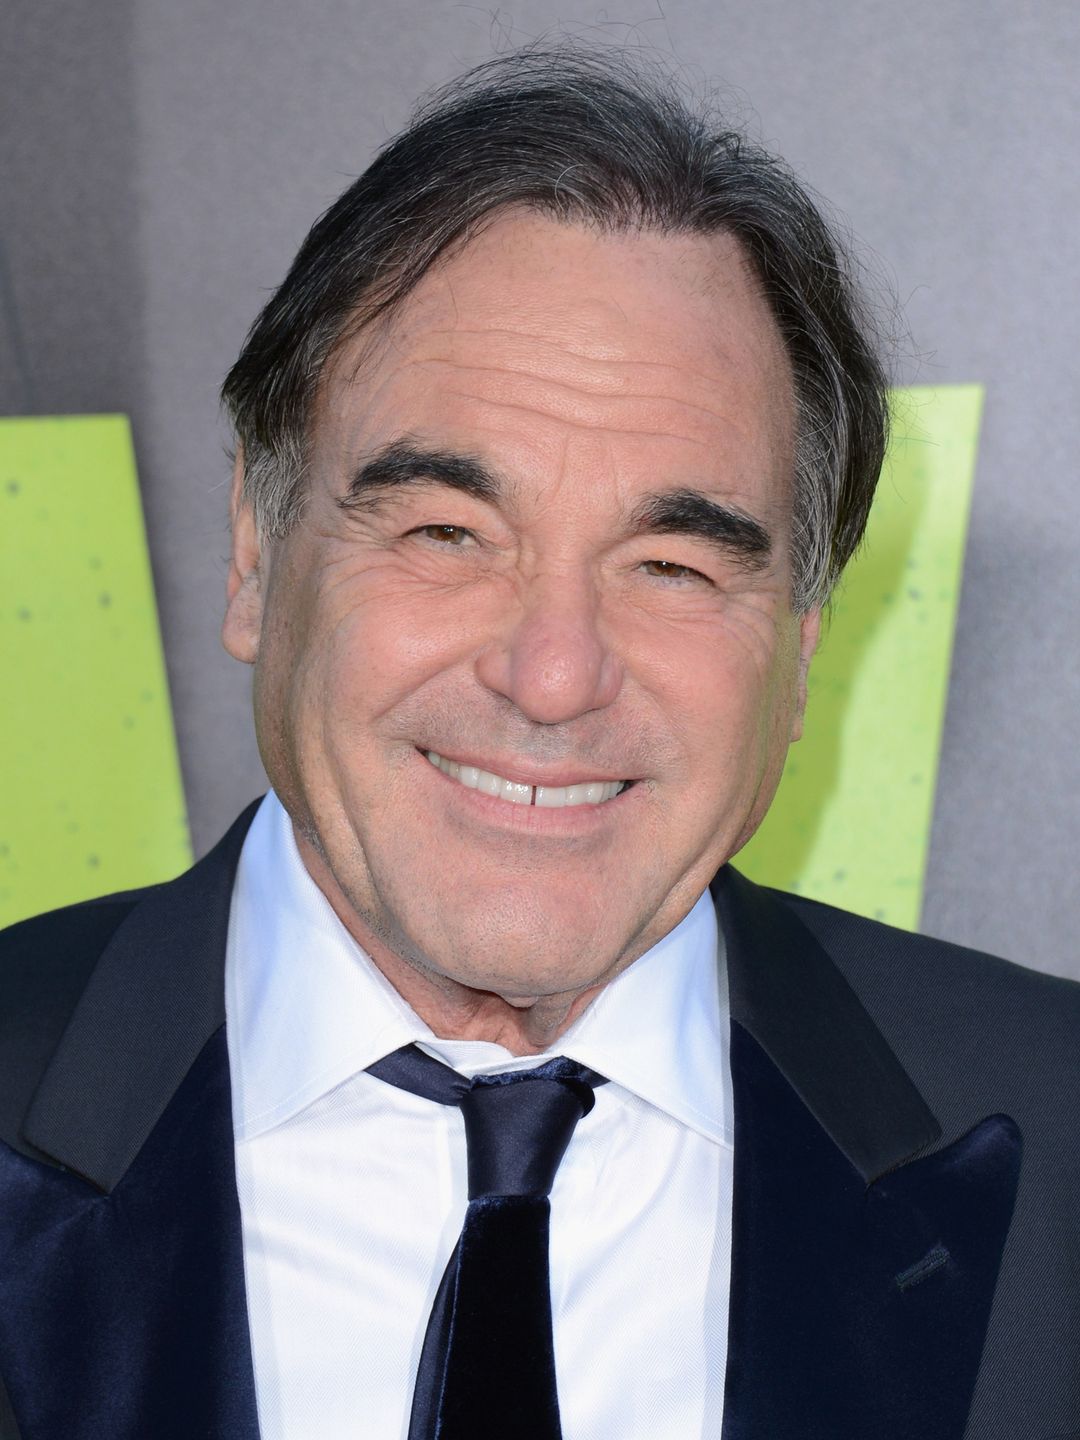 Oliver Stone personal traits